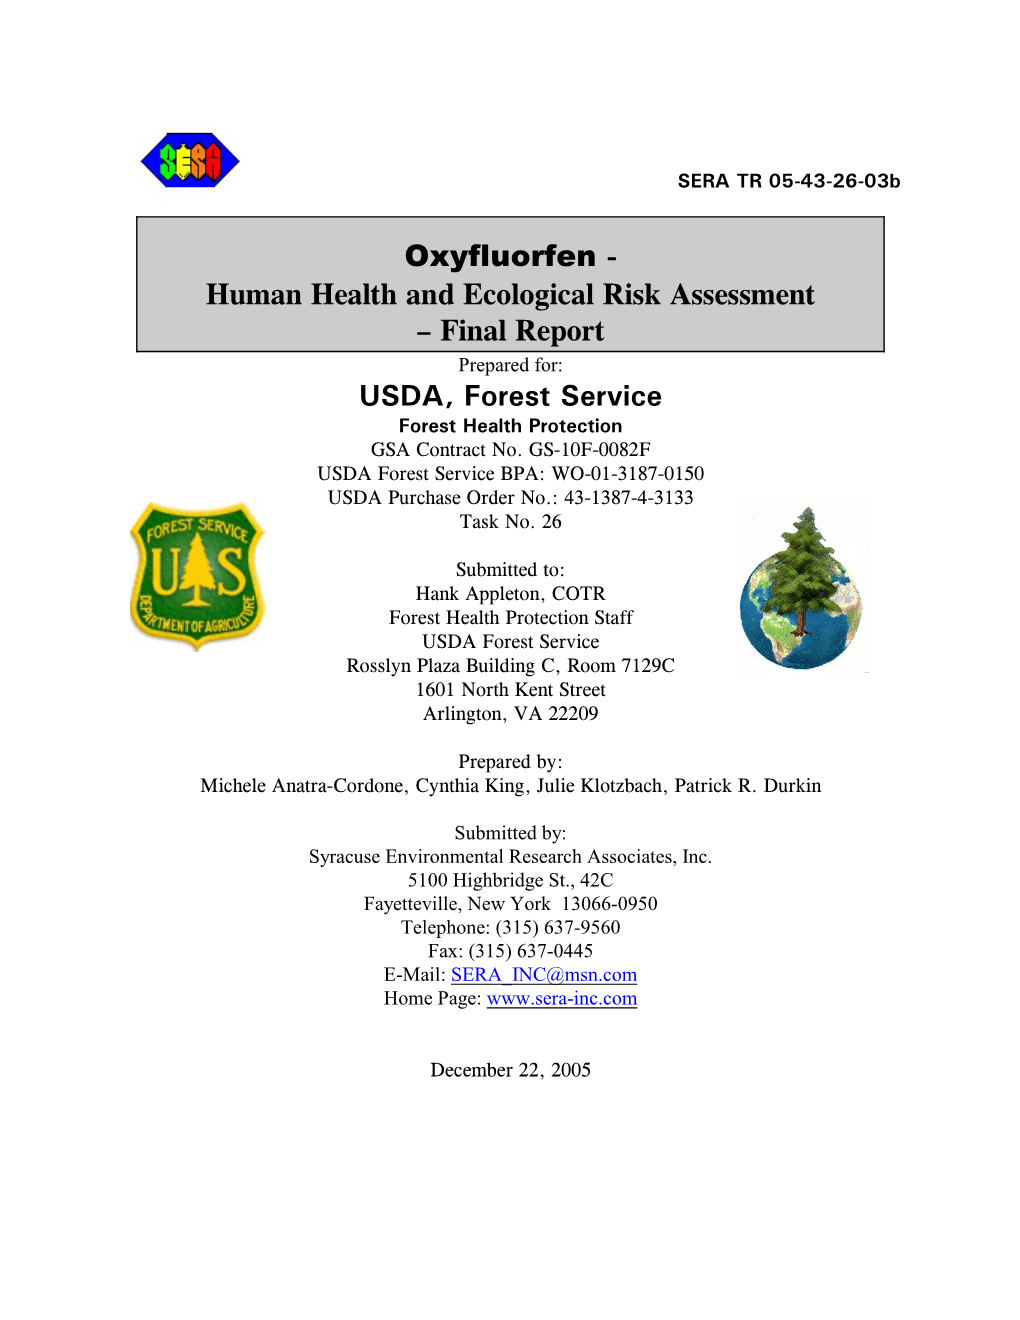 Oxyfluorfen - Human Health and Ecological Risk Assessment – Final Report Prepared For: USDA, Forest Service Forest Health Protection GSA Contract No